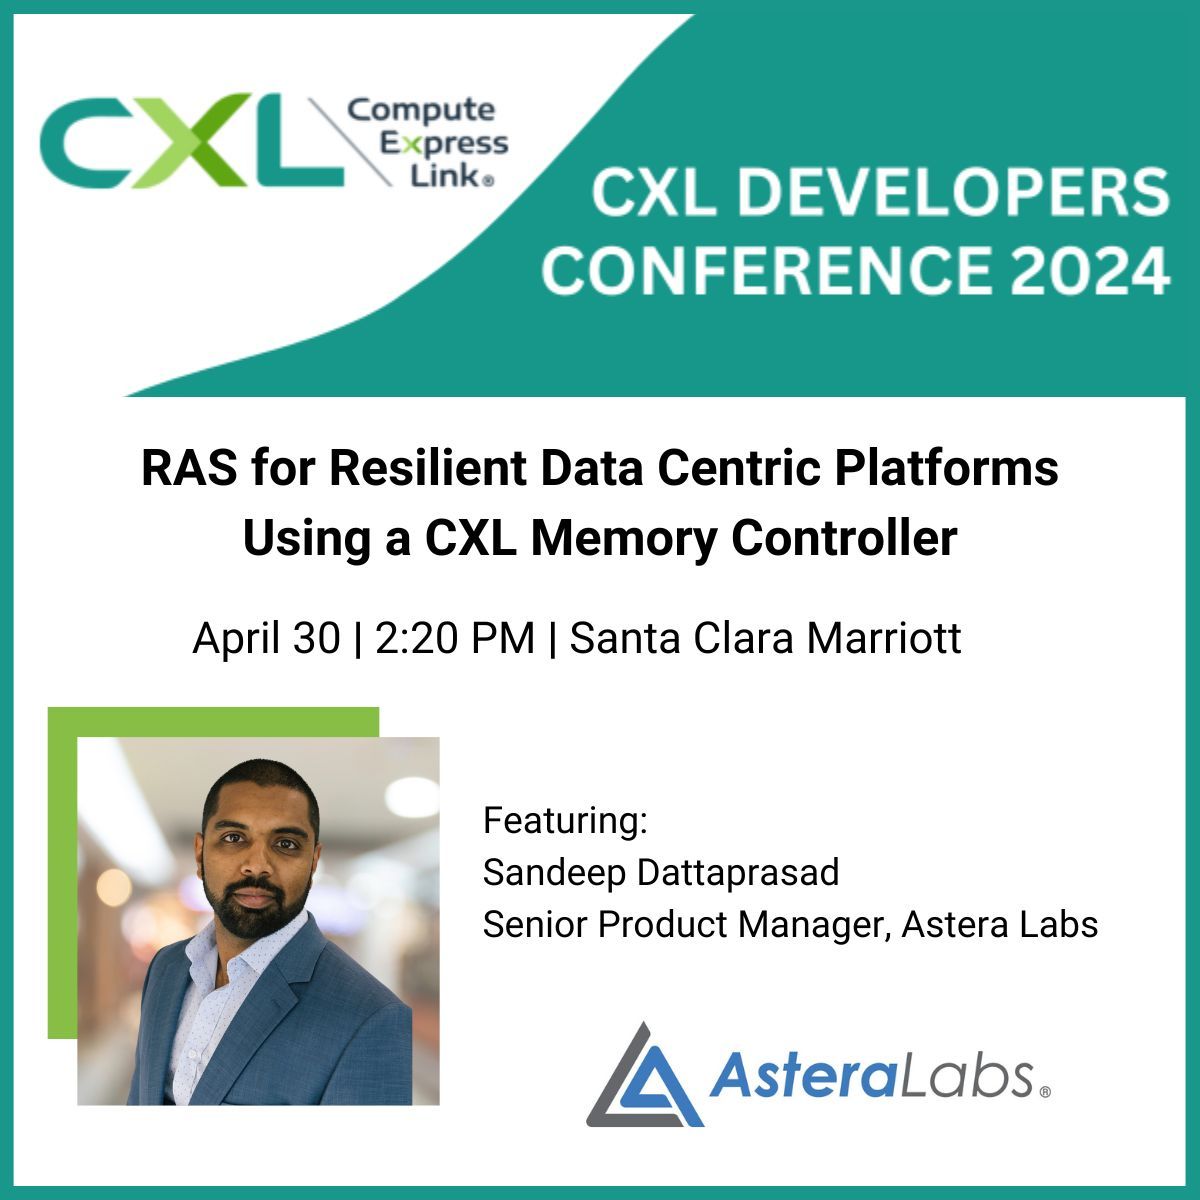 Join us at #CXL DevCon, taking place April 30-May 1 in Santa Clara. We will present on “RAS for Resilient Data Centric Platforms Using a CXL Memory Controller.” 

Register today: buff.ly/4cHkYgE 

@ComputeExLink #ComputeExpressLink #AI #Cloud #datacenter #innovation